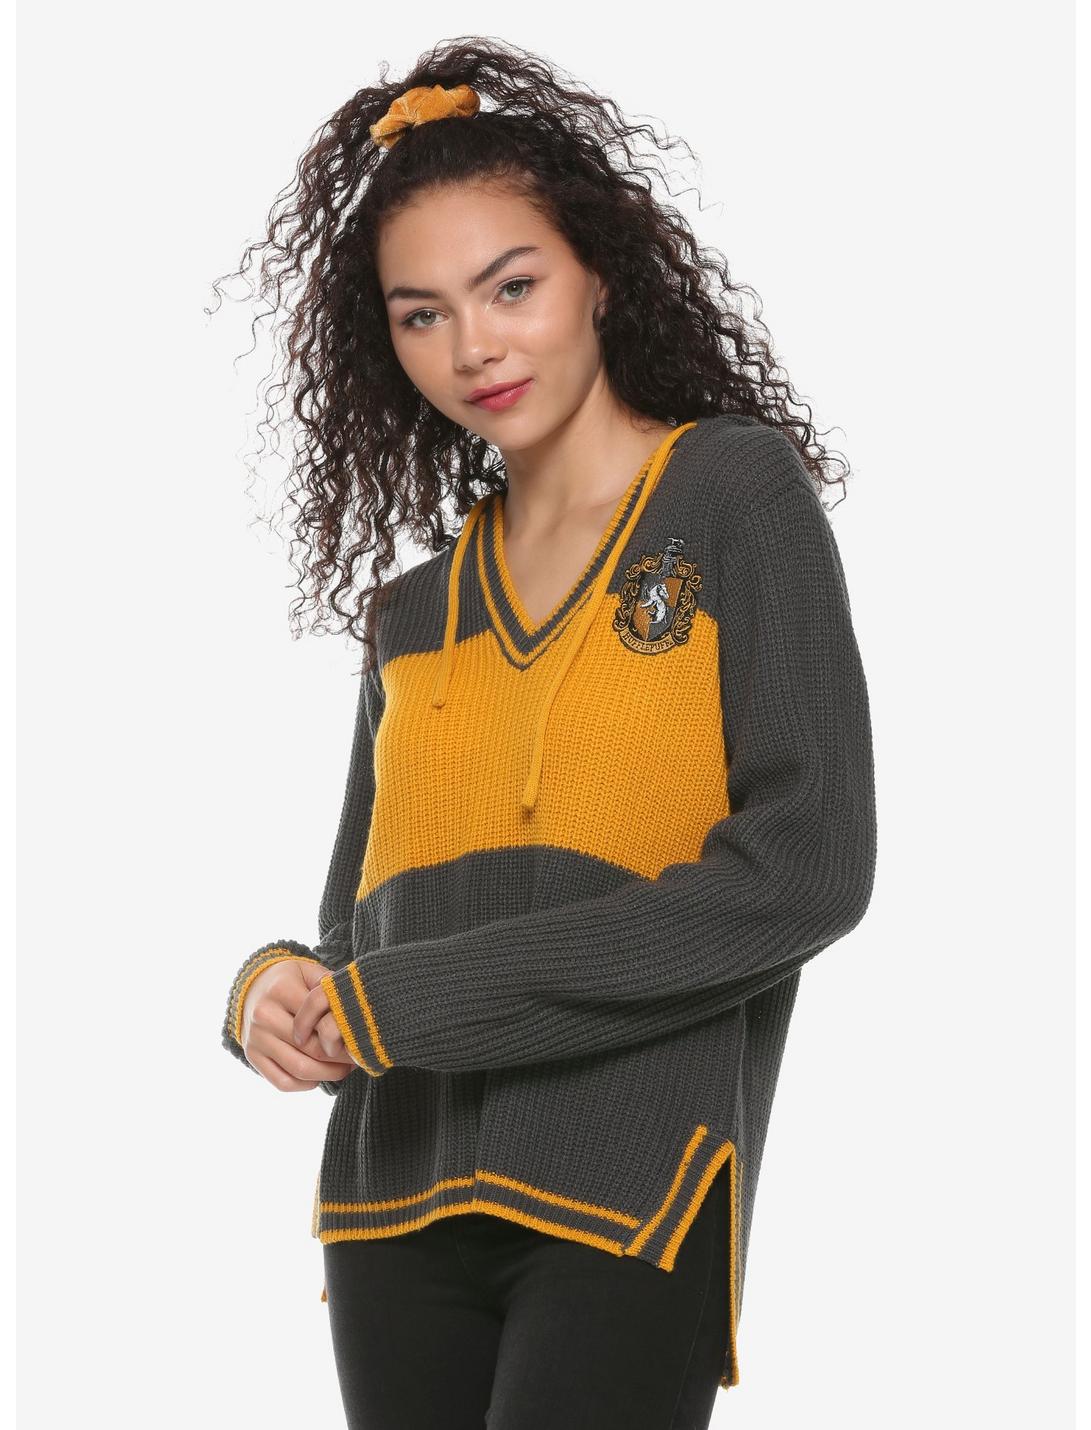 Harry Potter Hufflepuff Girls Hooded Sweater, YELLOW, hi-res